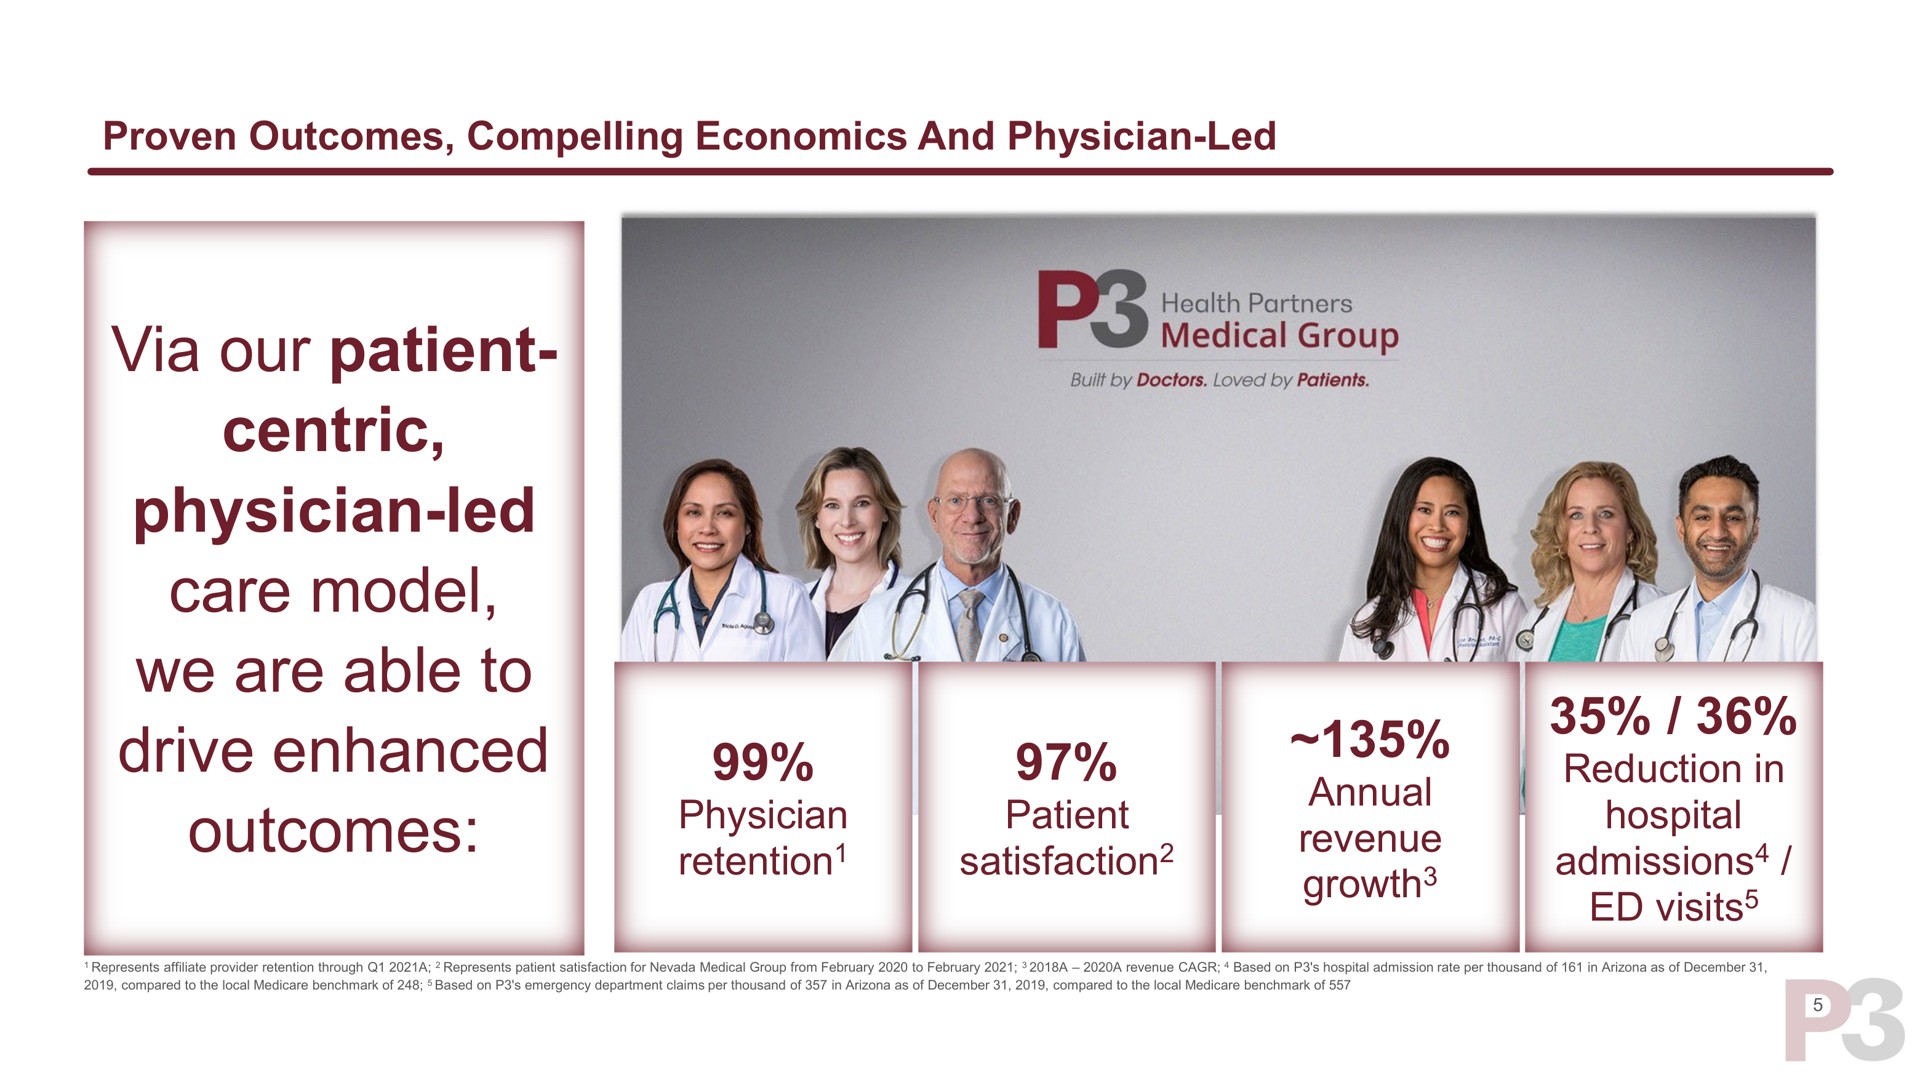 proven outcomes compelling economics and physician led via our patient centric physician led care model we are able to drive enhanced outcomes physician retention patient satisfaction annual revenue growth reduction in hospital admissions visits rive admissions visits satisfaction retention grow | P3 Health Partners